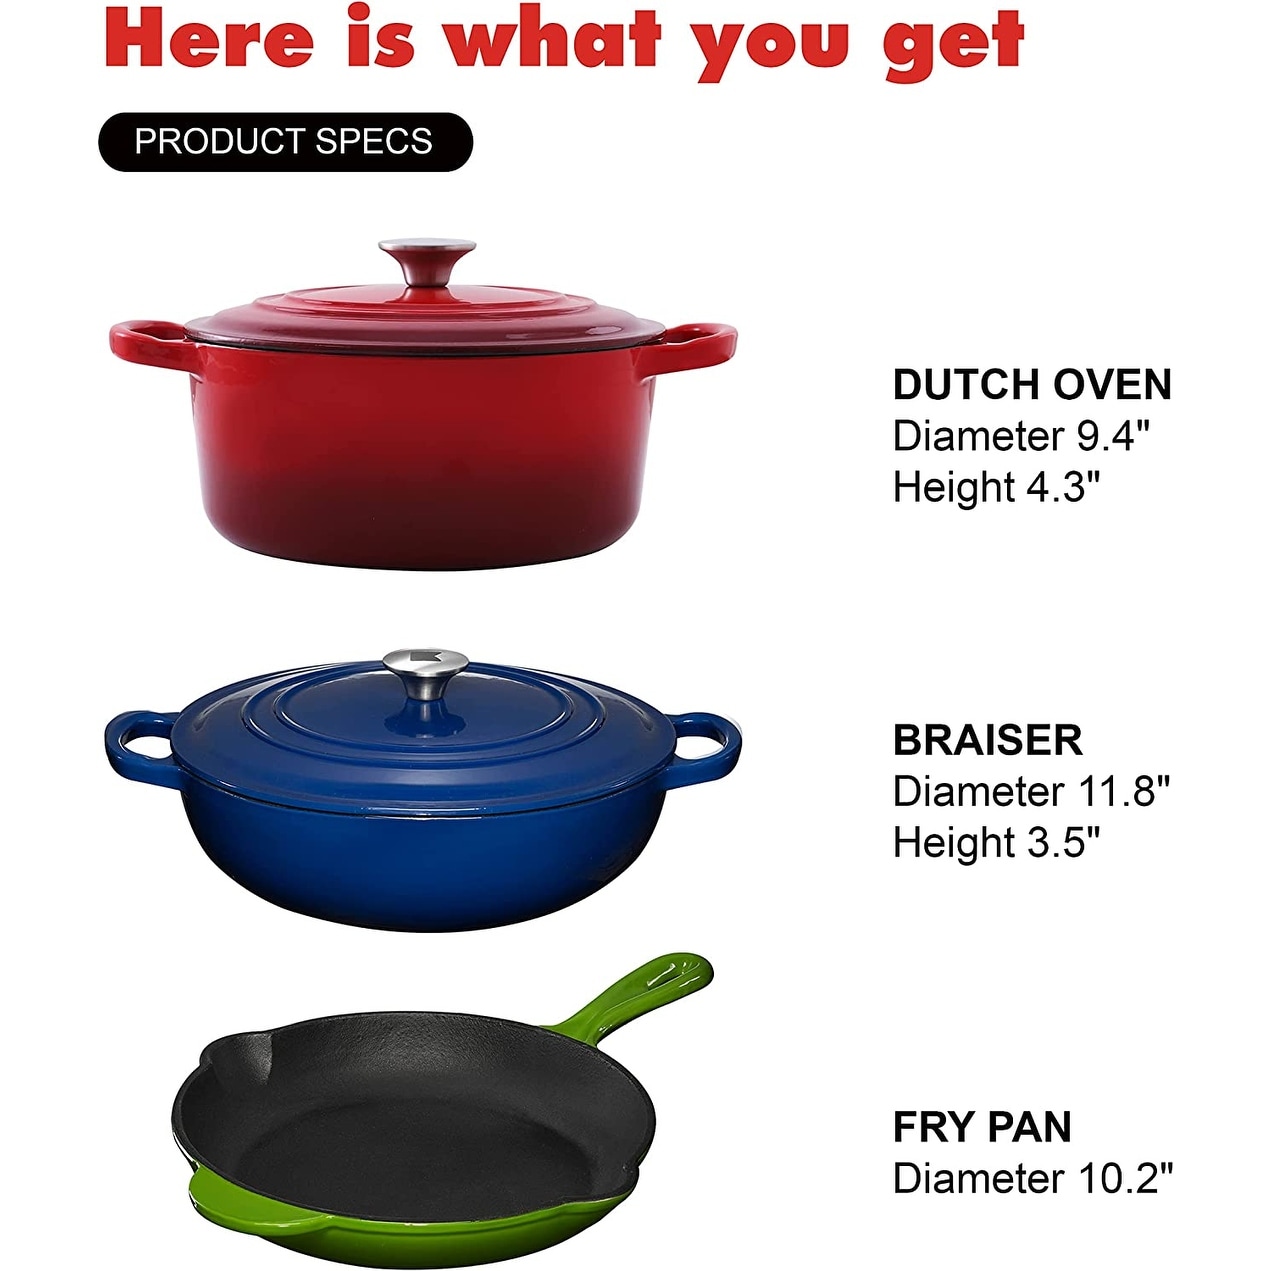 Enameled Cast Iron Cookware Set - 5 Pieces Solid Colored Braiser